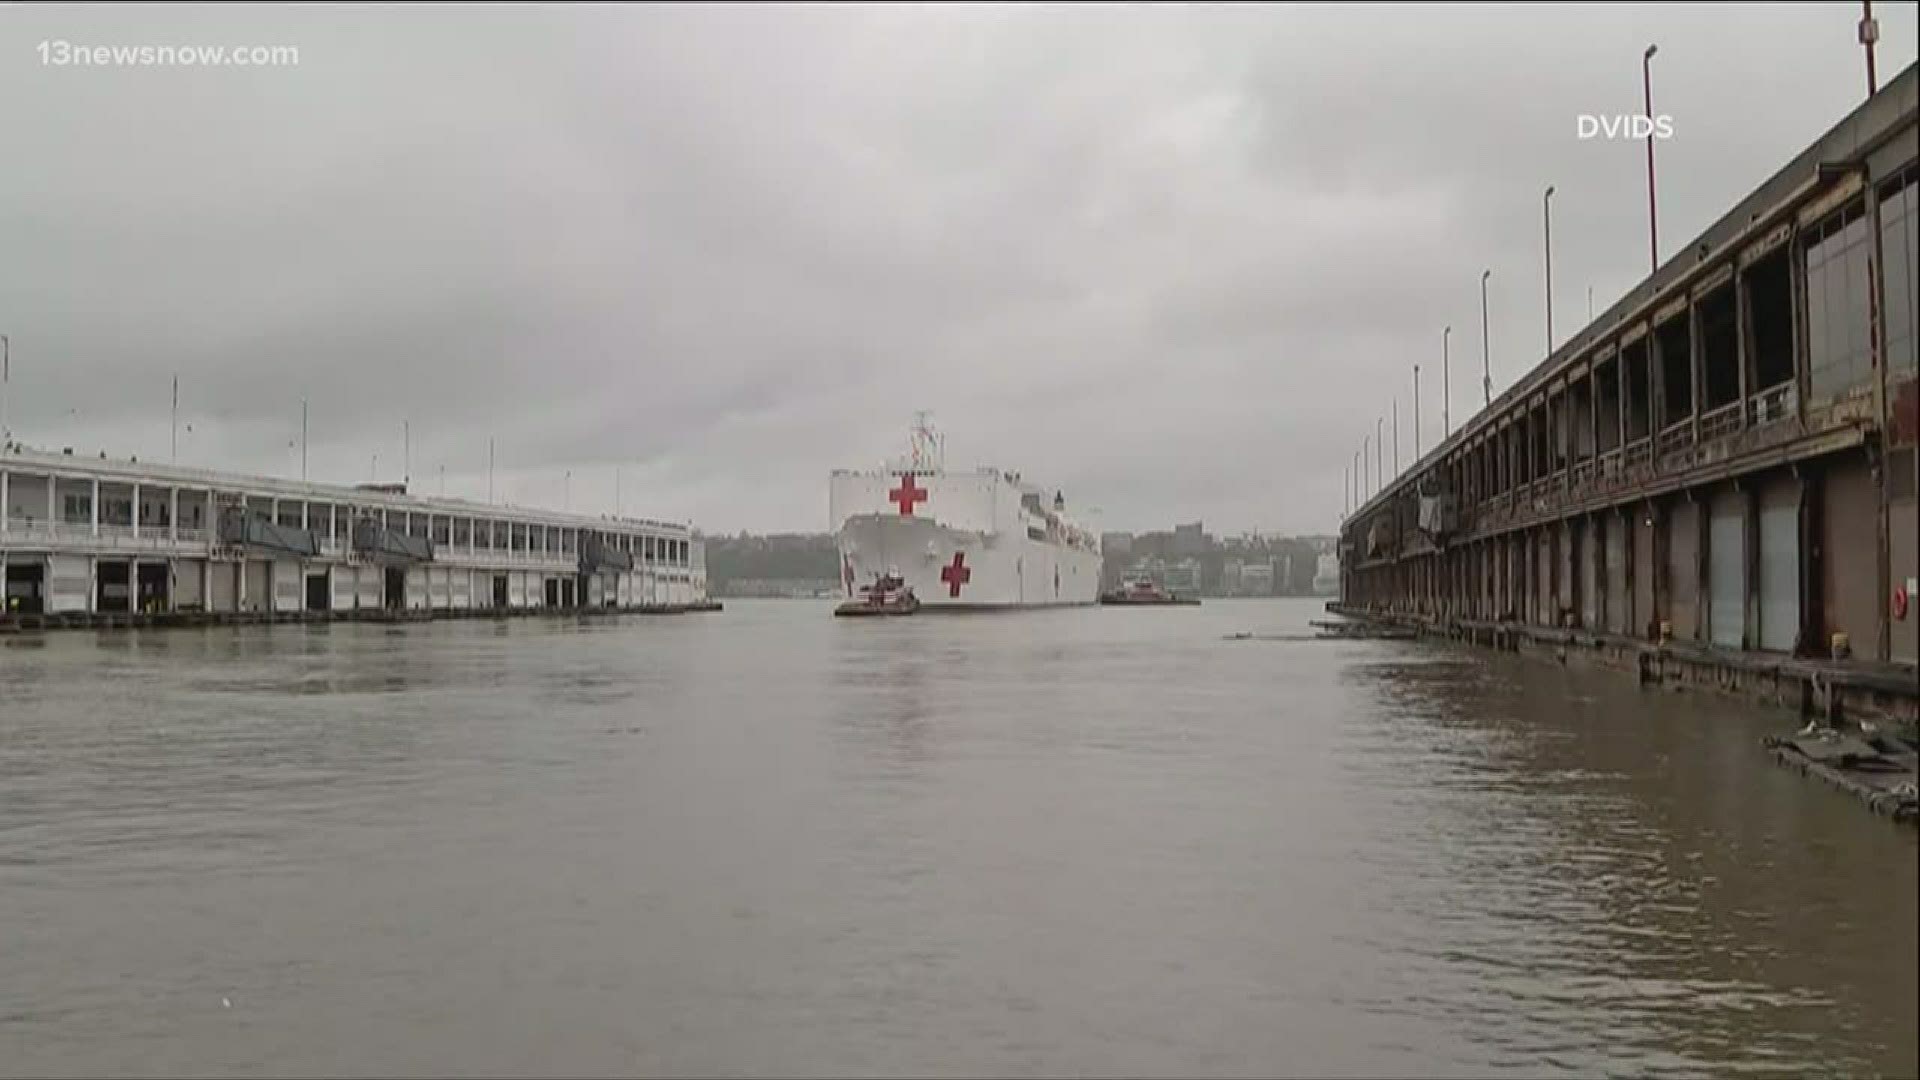 The USNS Comfort started the journey back to Hampton Roads on Thursday. When it reaches port, the crew will undergo two weeks of restricted movement, to be safe.